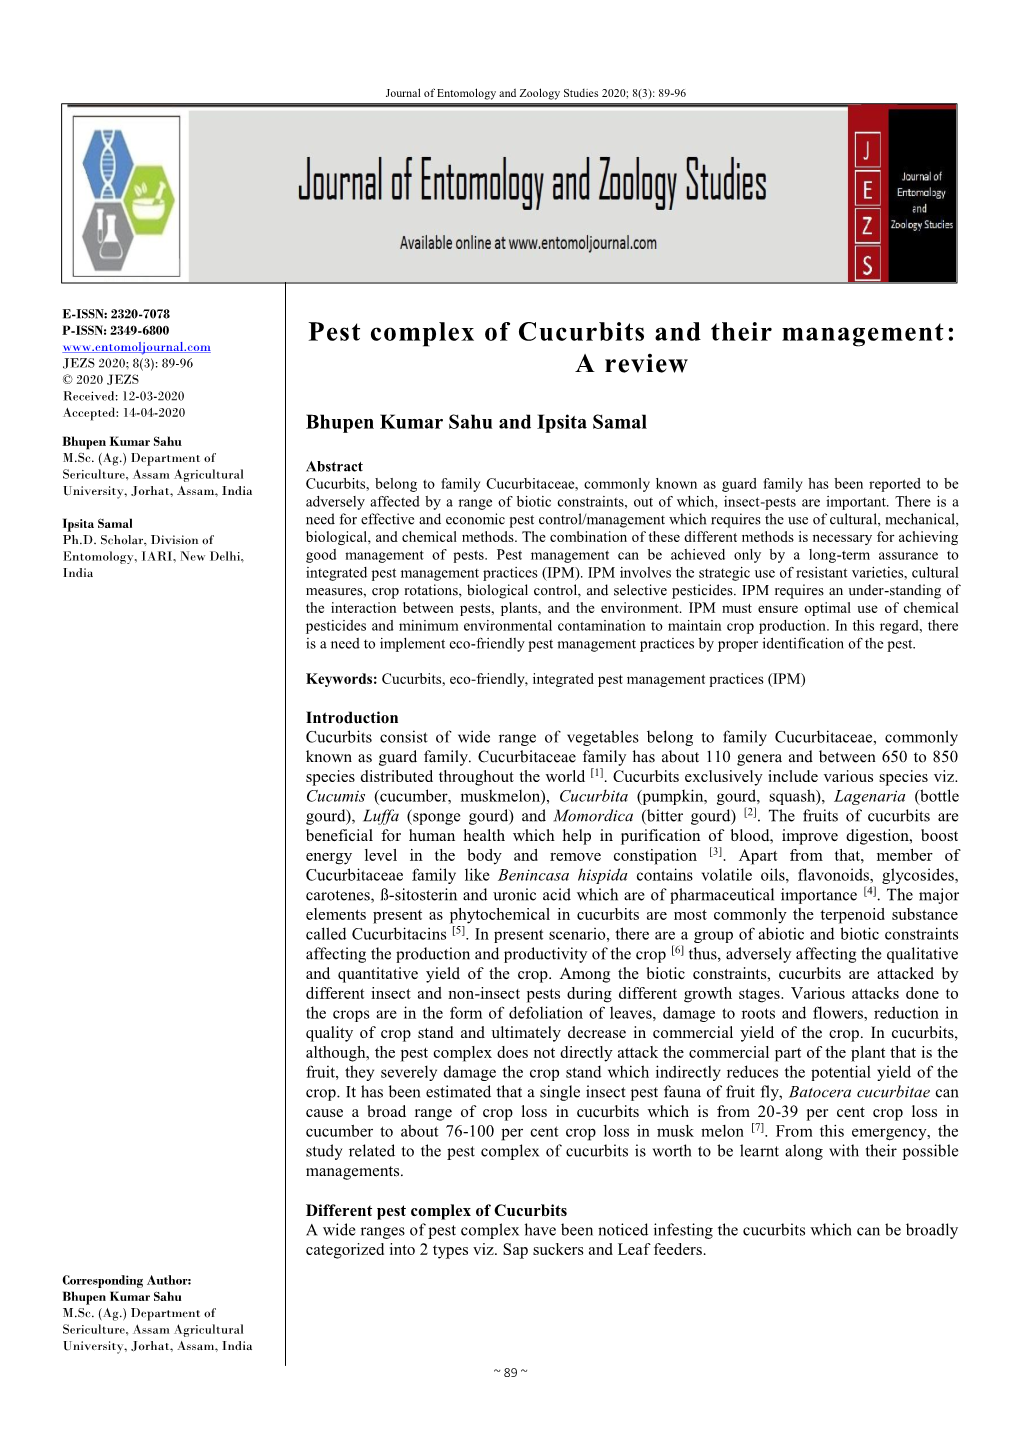 Pest Complex of Cucurbits and Their Management: a Review